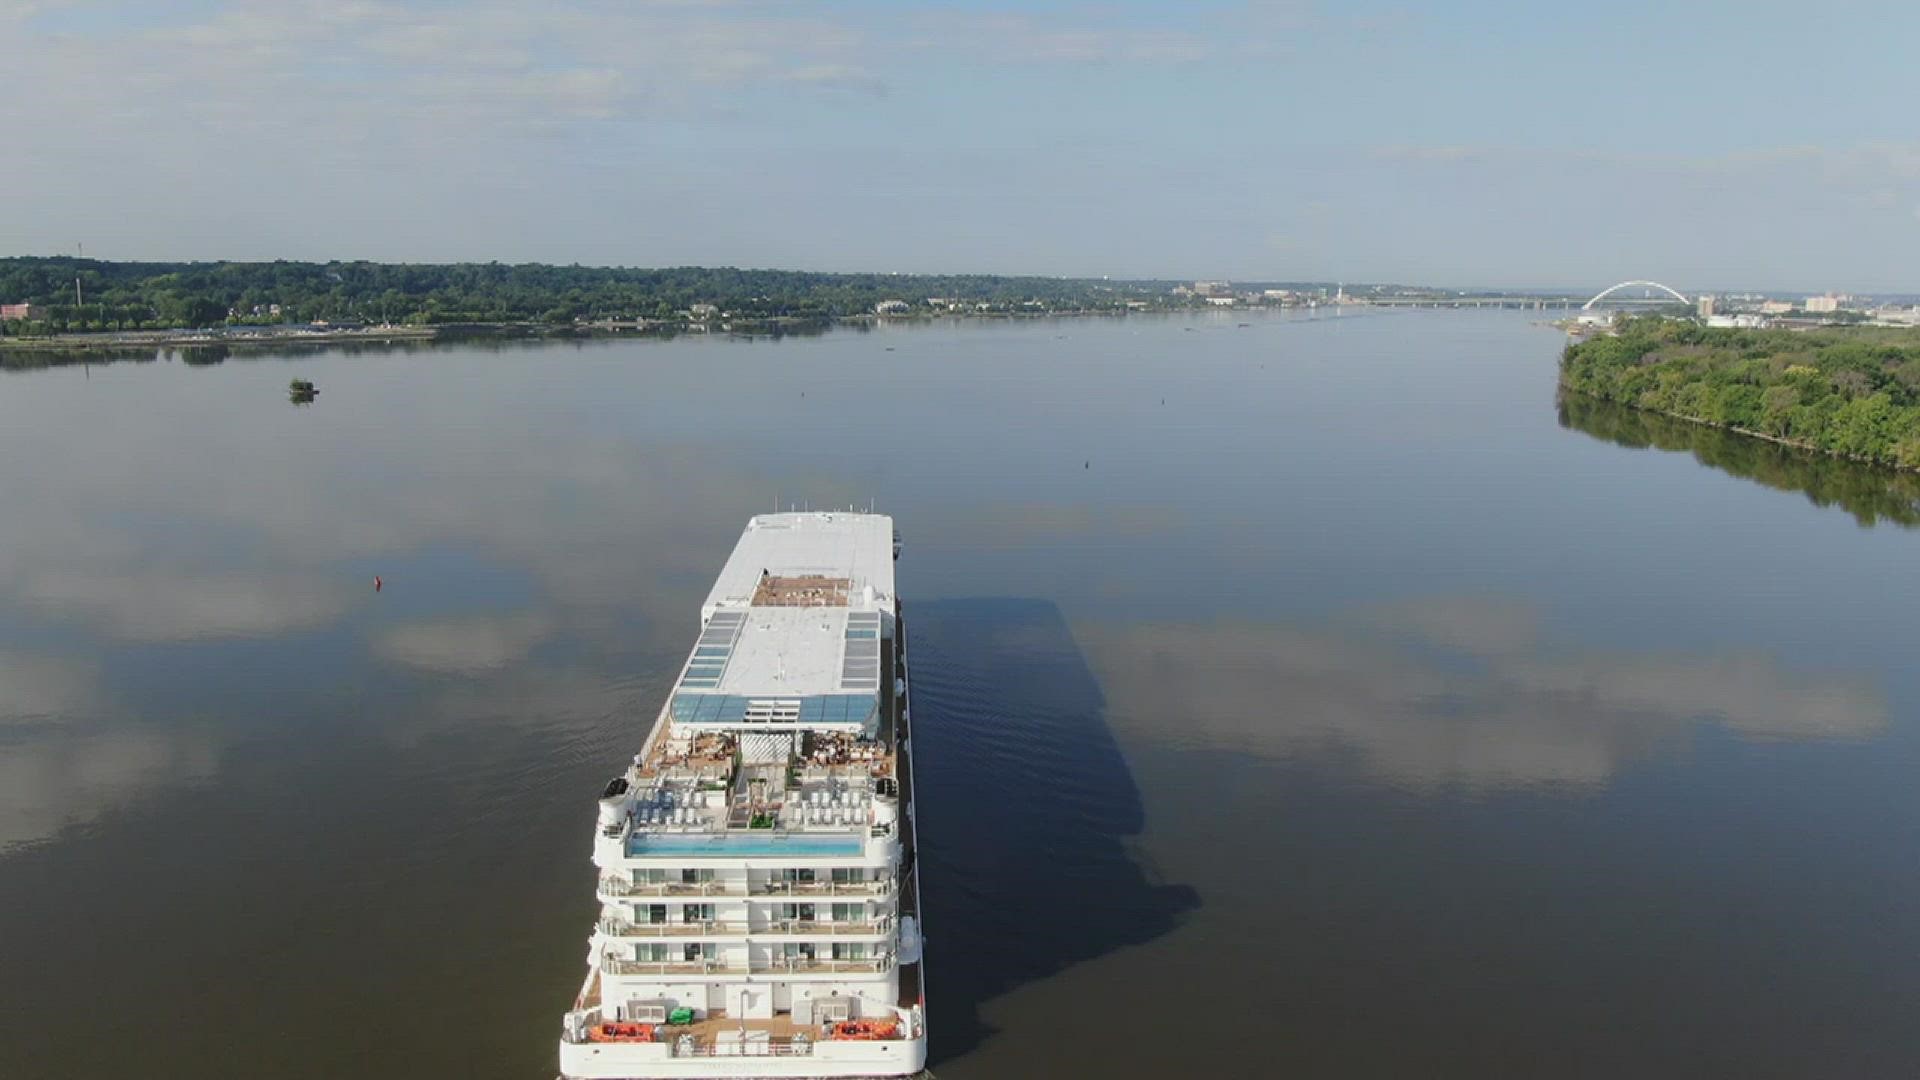 Viking River Cruises sail on 7 continents and 18 rivers, including a new route on the Mississippi River through the heart of the Midwest.